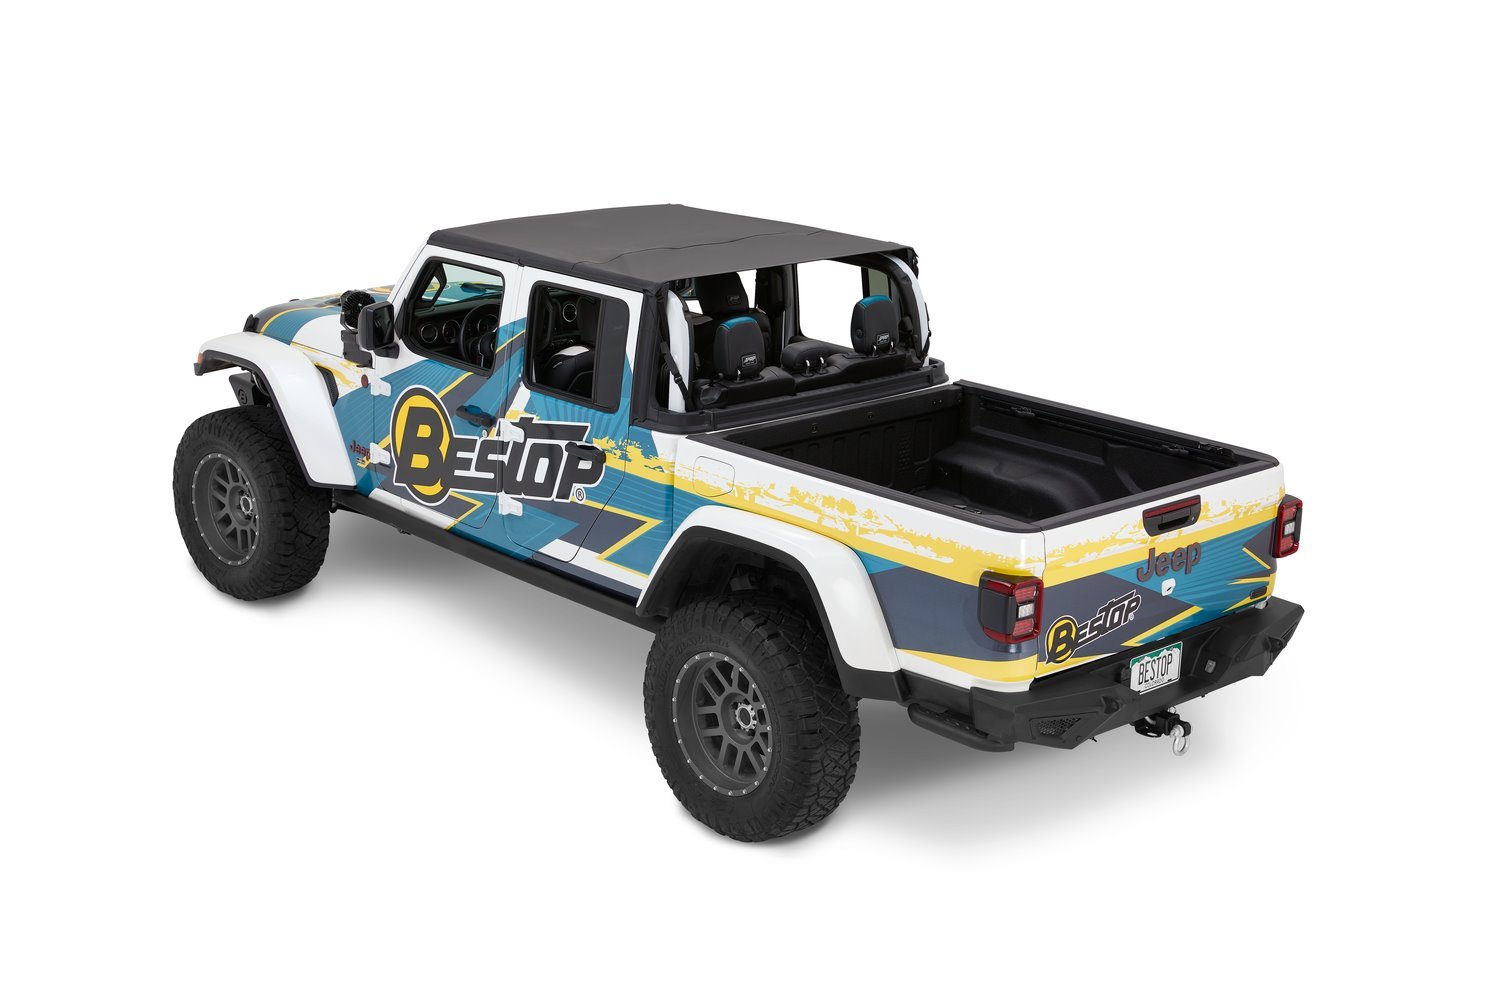 Header Extended Safari Cable Style Bikini Top, Black Diamond, Incl. Windshield Header, Requires Soft Top Door Sorrounds,